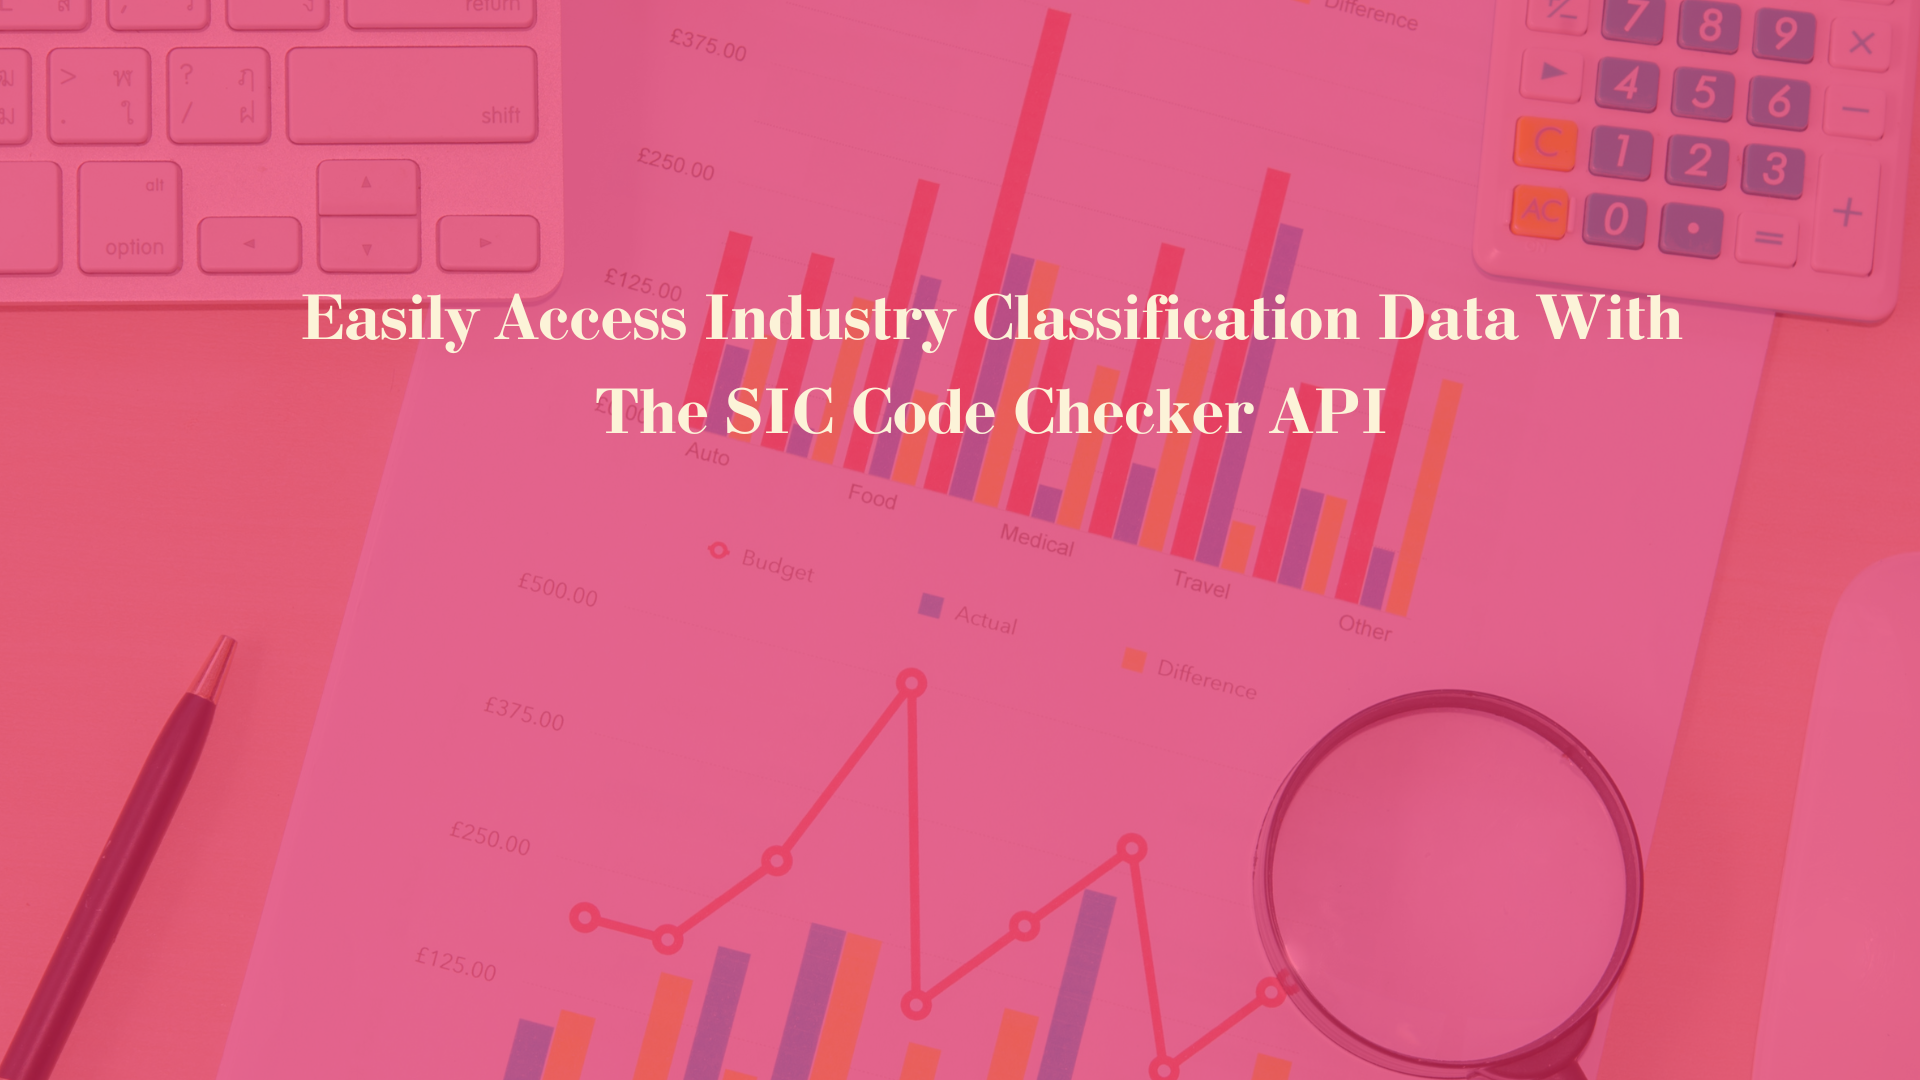 Easily Access Industry Classification Data With The SIC Code Checker API